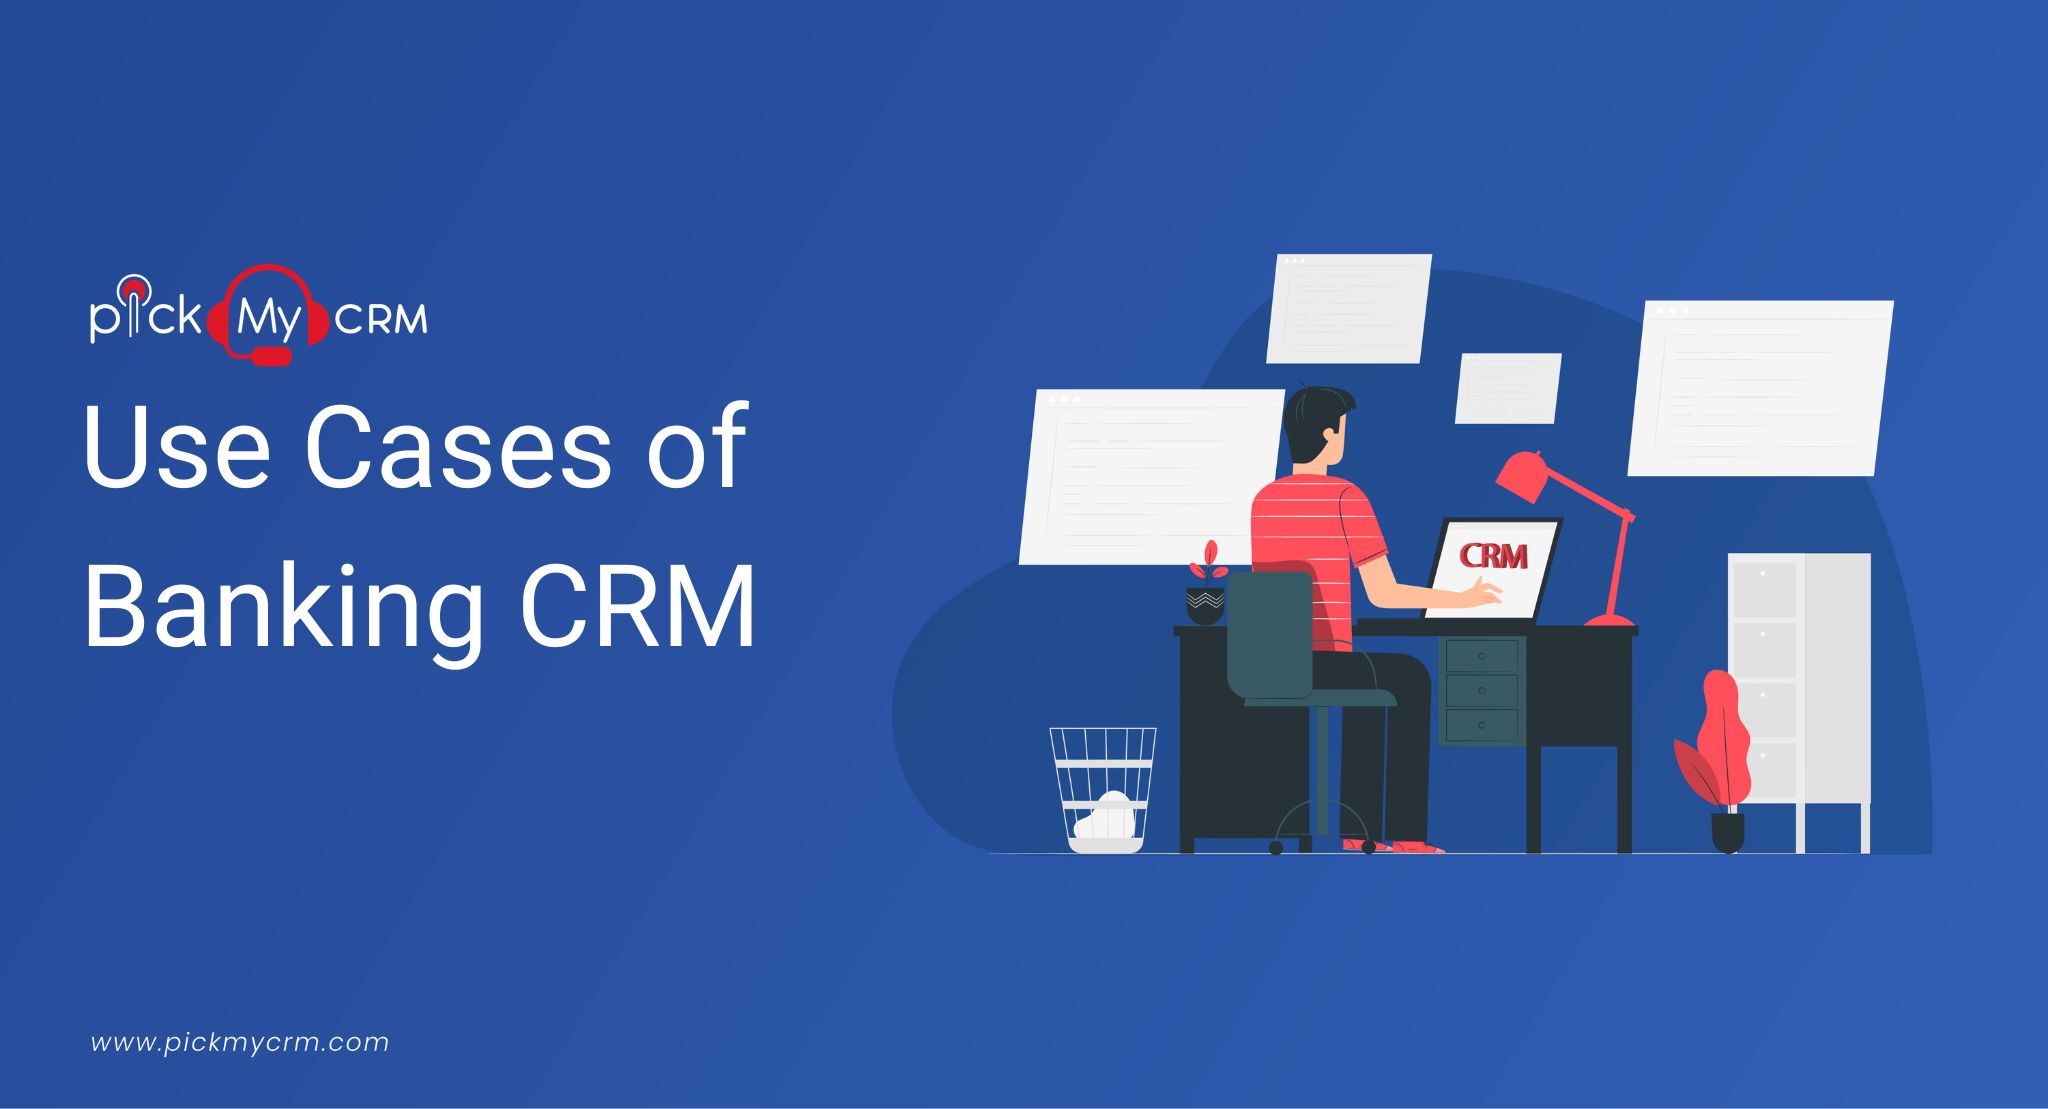 Use Cases of Banking CRM